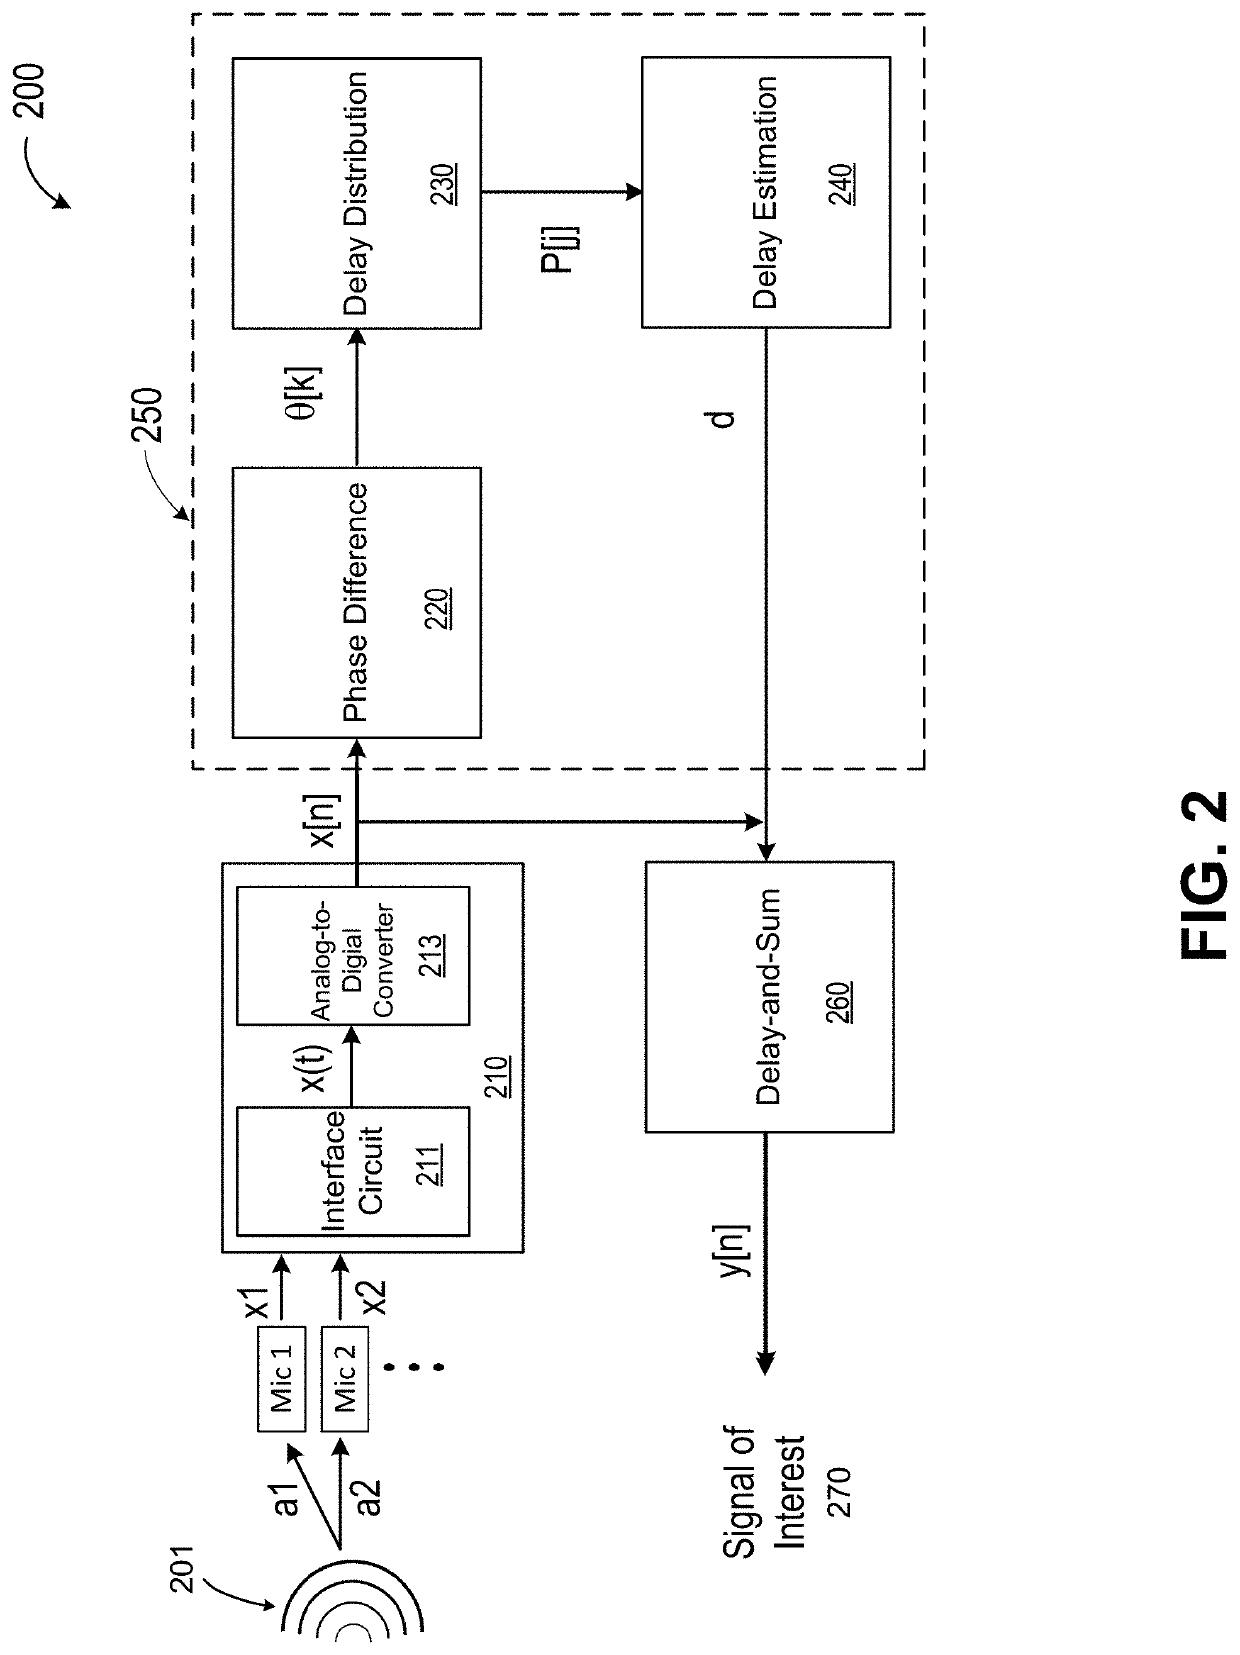 Beamforming system based on delay distribution model using high frequency phase difference